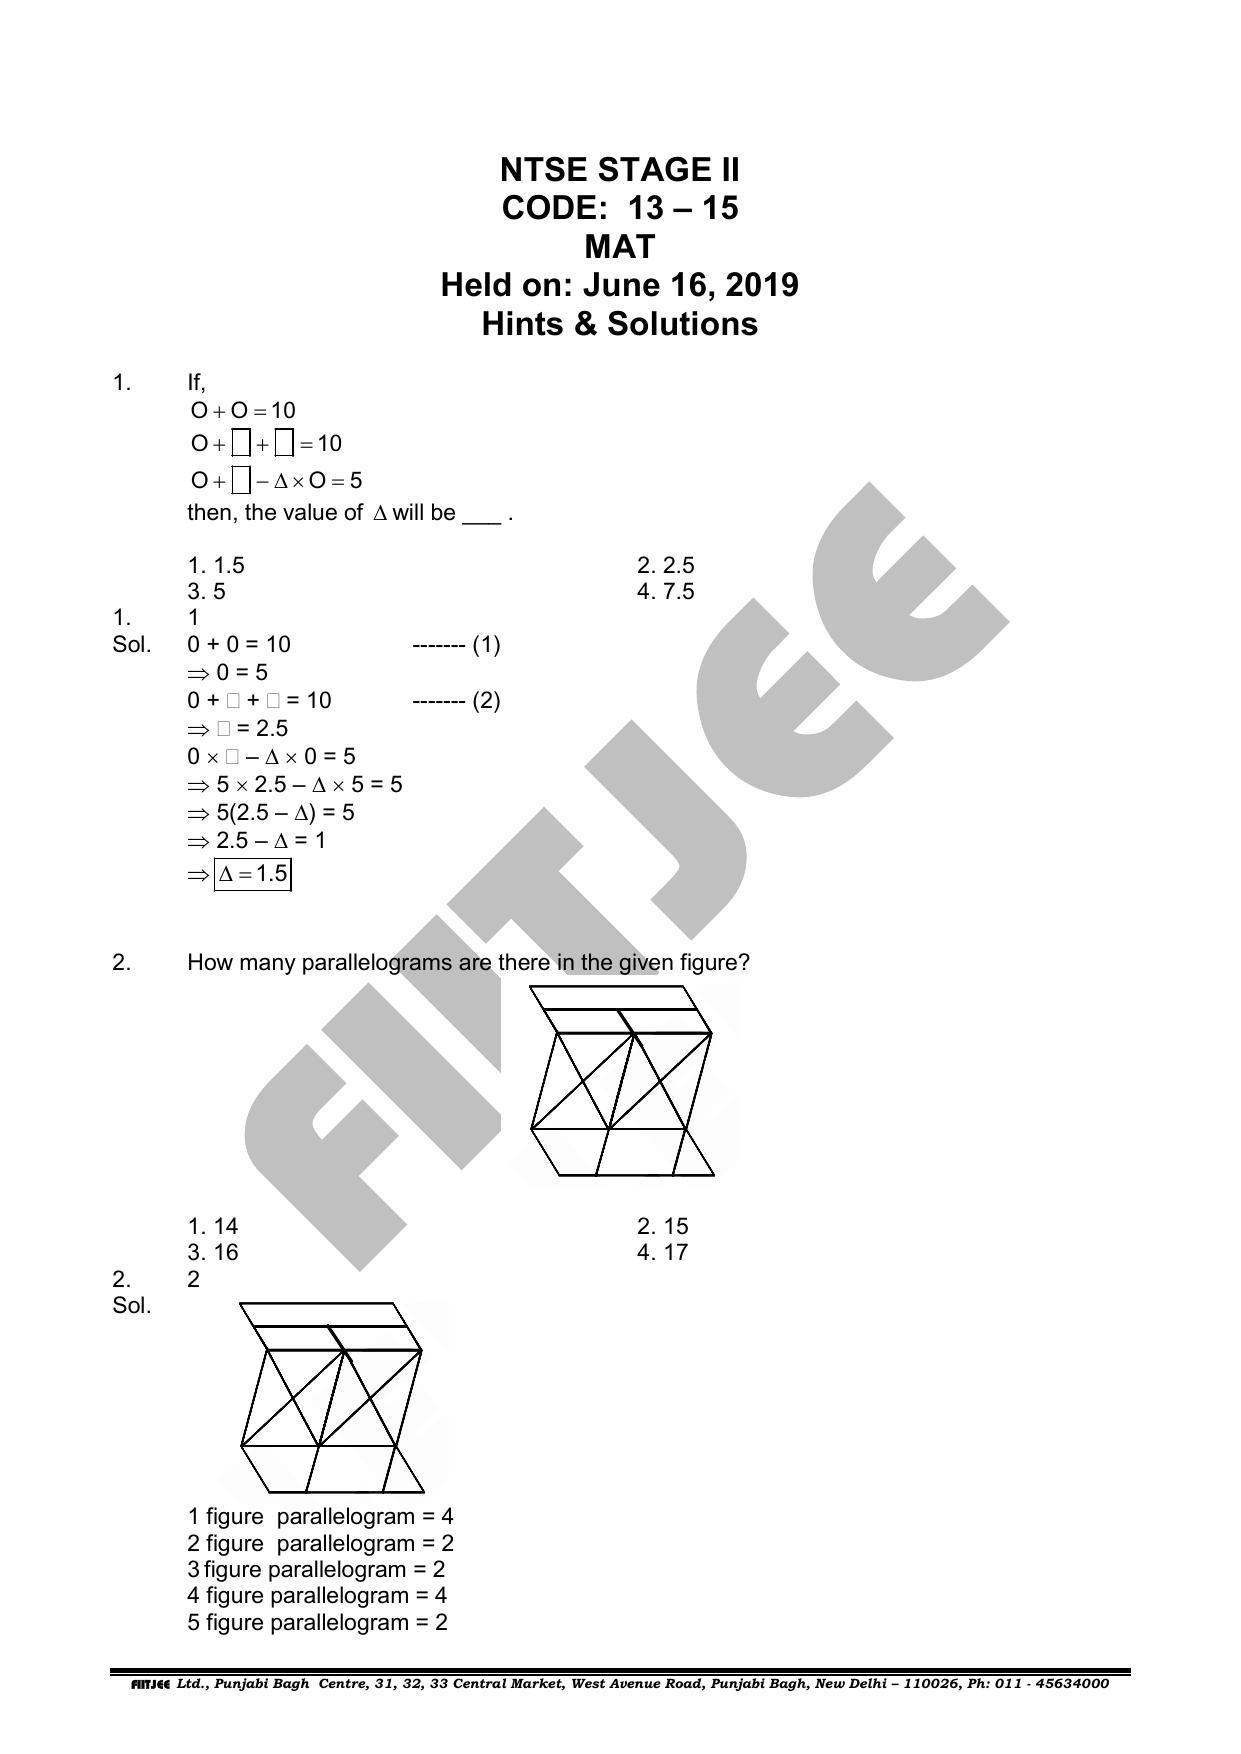 NTSE 2019 (Stage II) MAT Question Paper with Solution (June 16, 2019) - Page 2